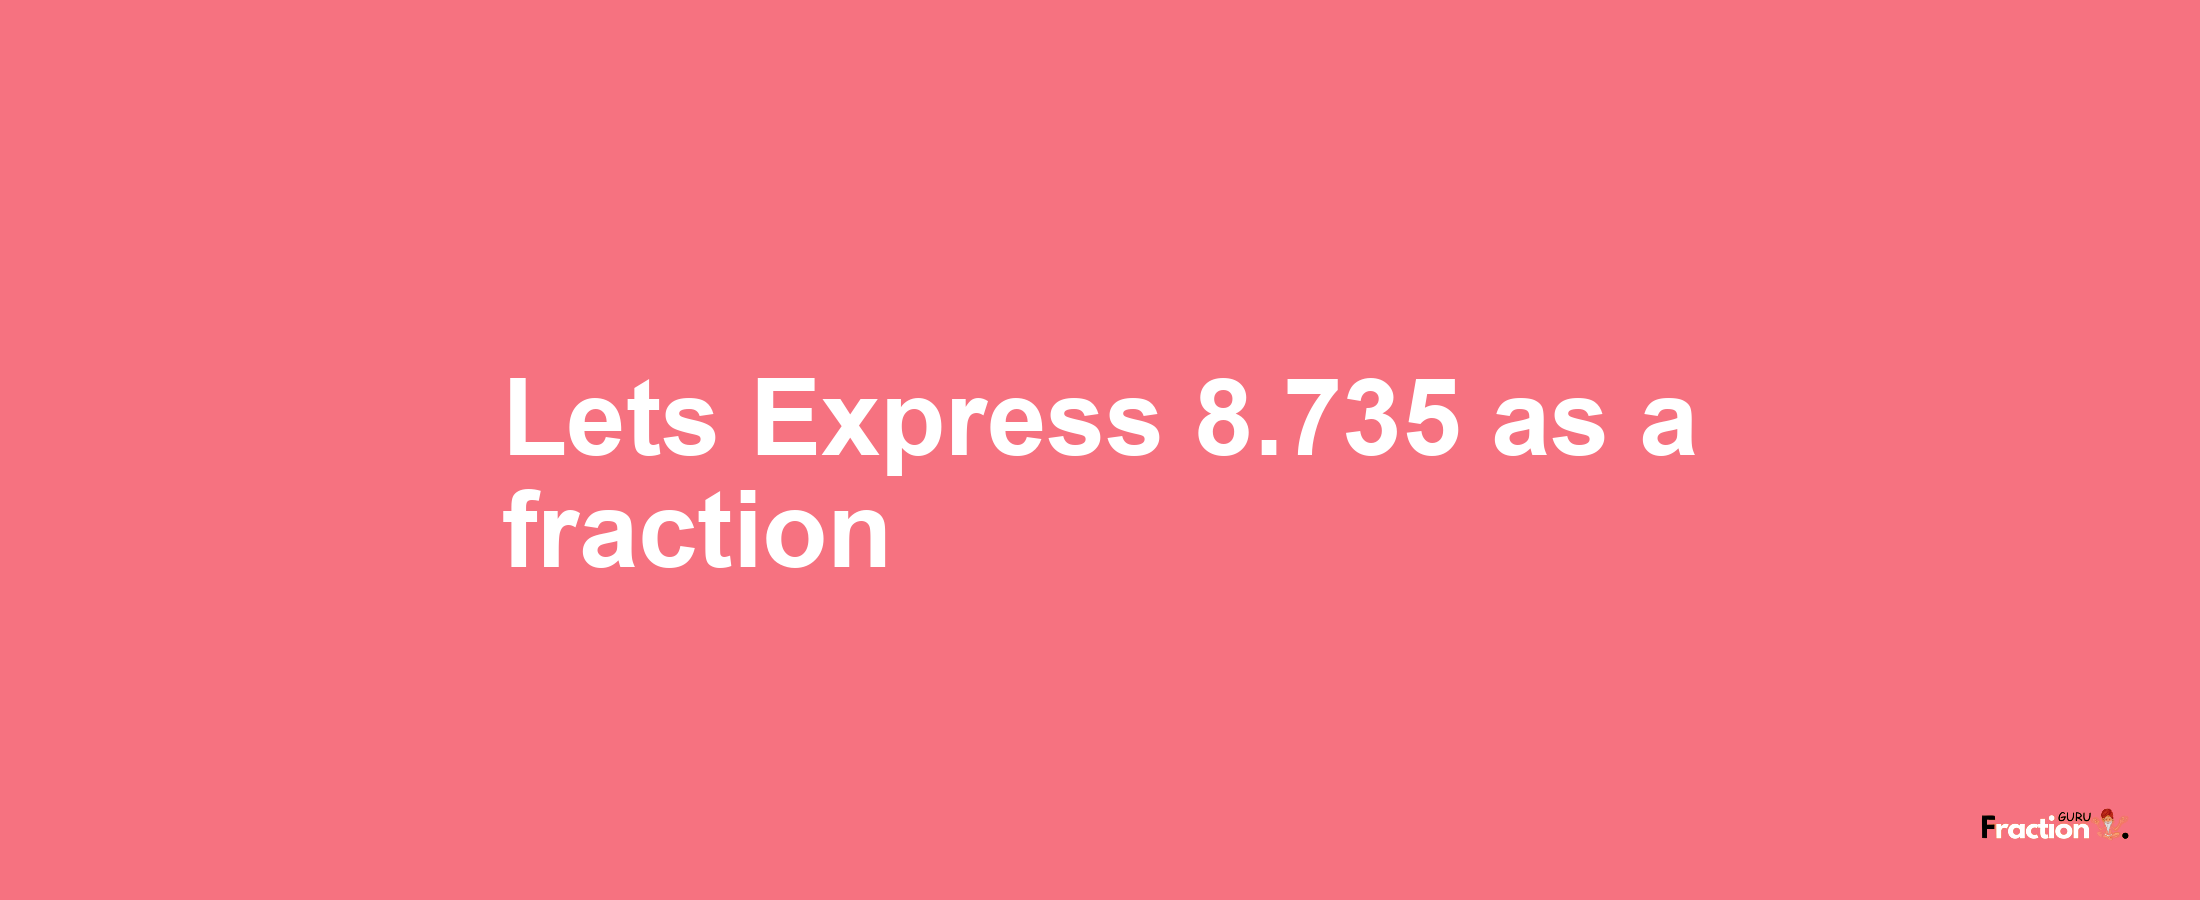 Lets Express 8.735 as afraction